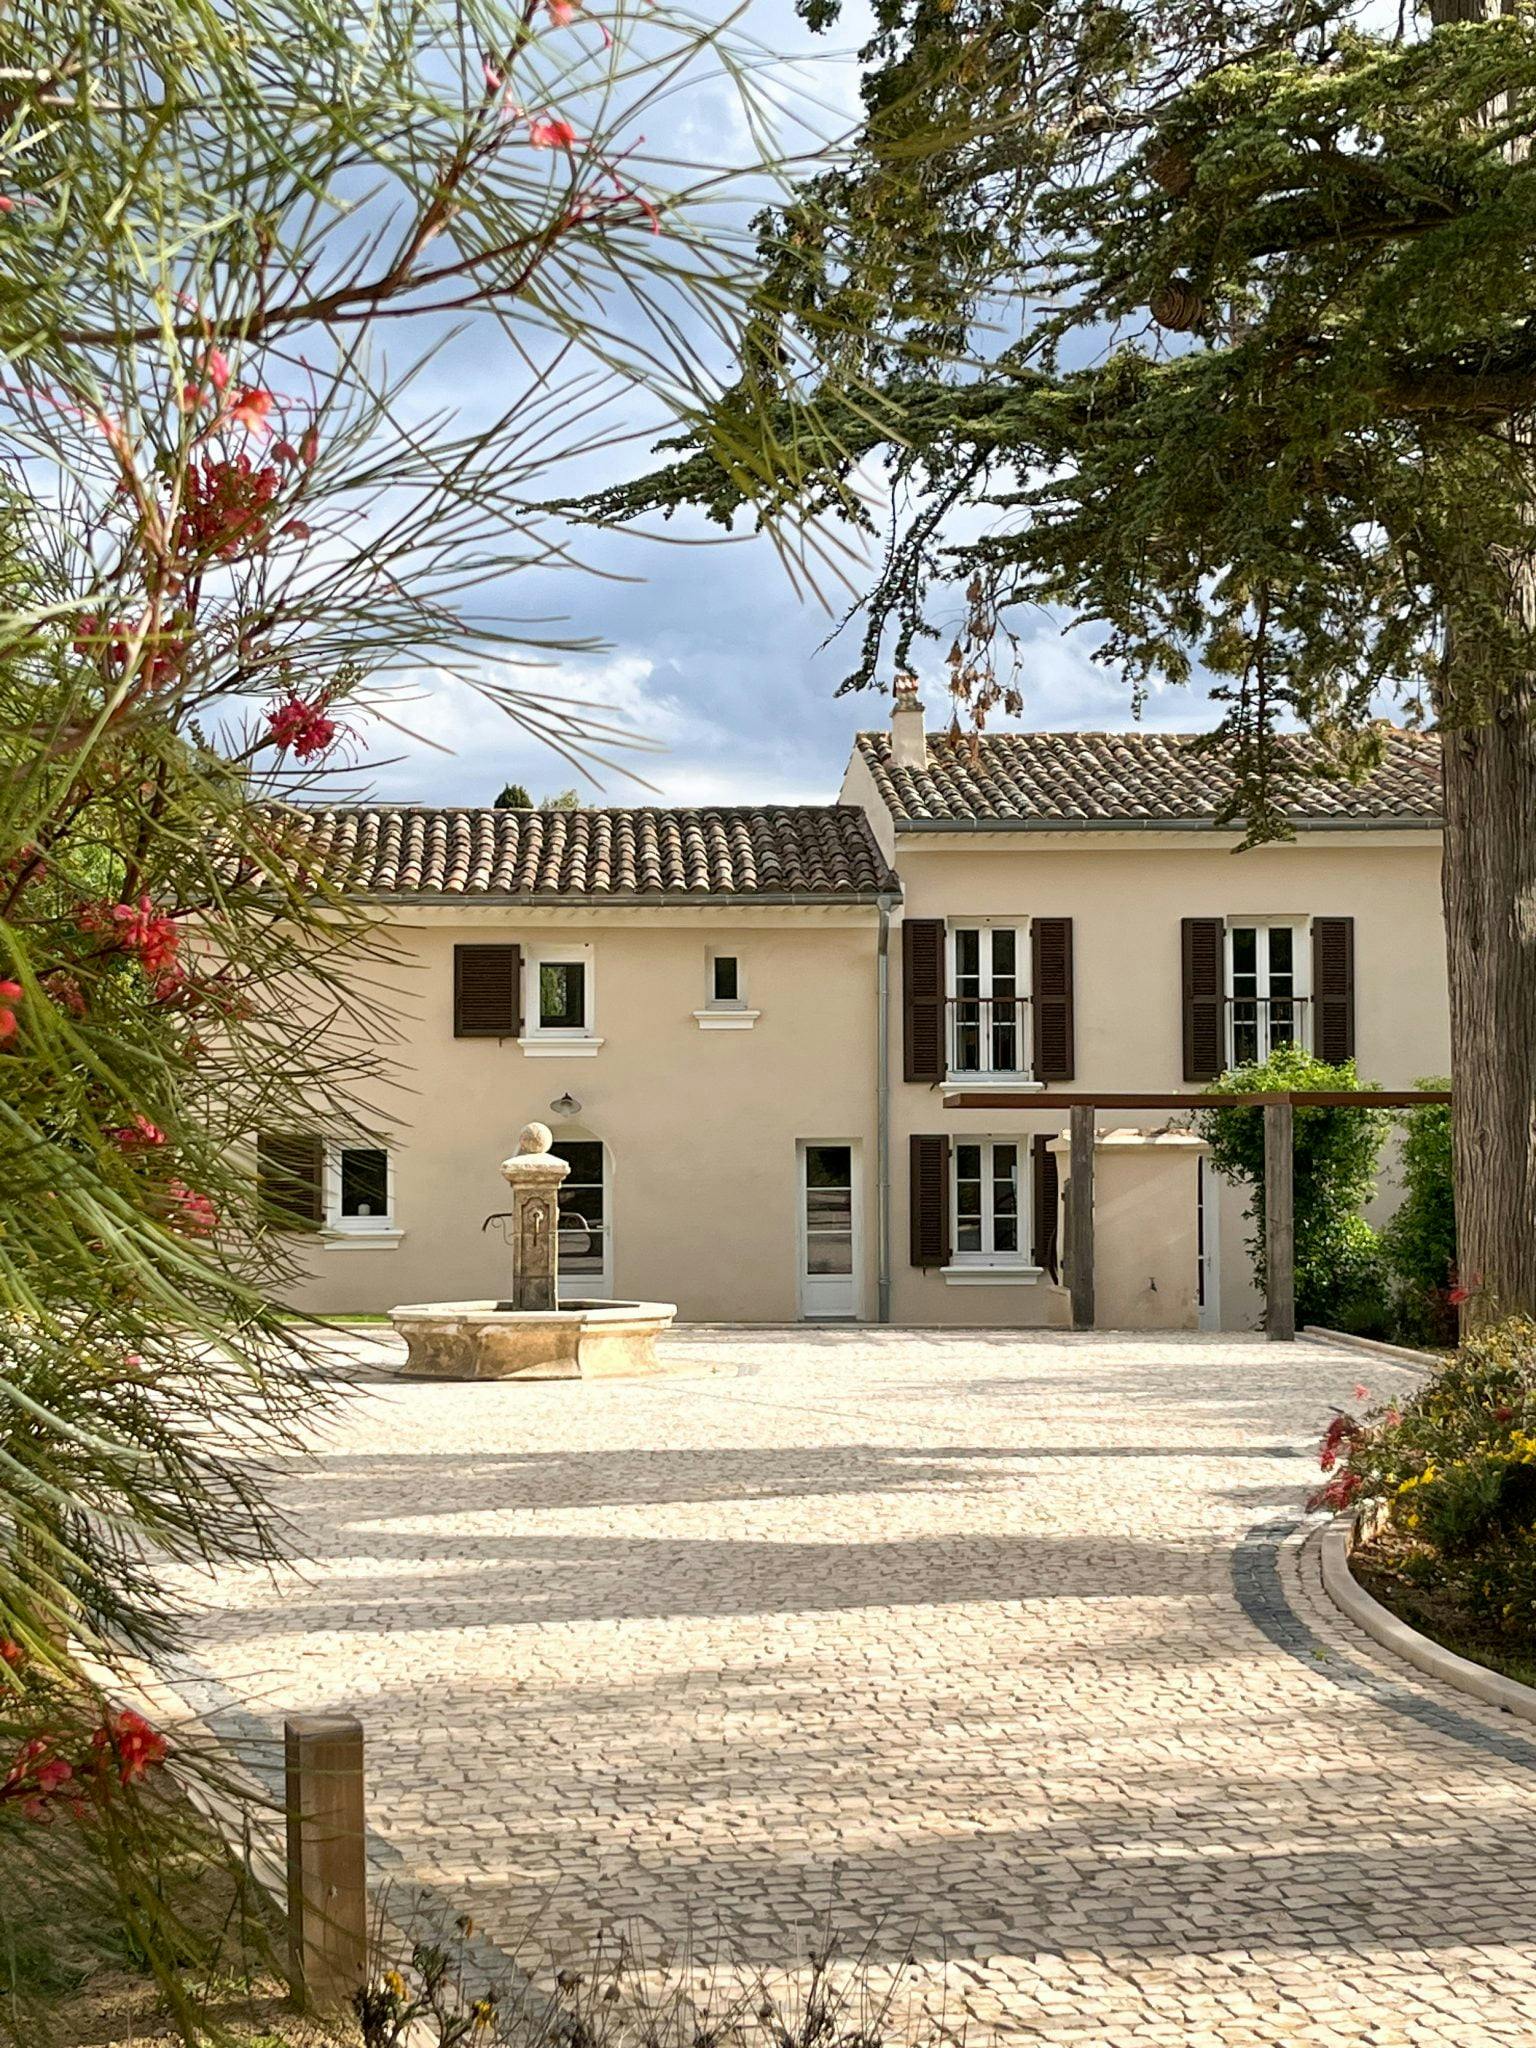 Paved path to the bastide with its small fountain, lined with shrubs